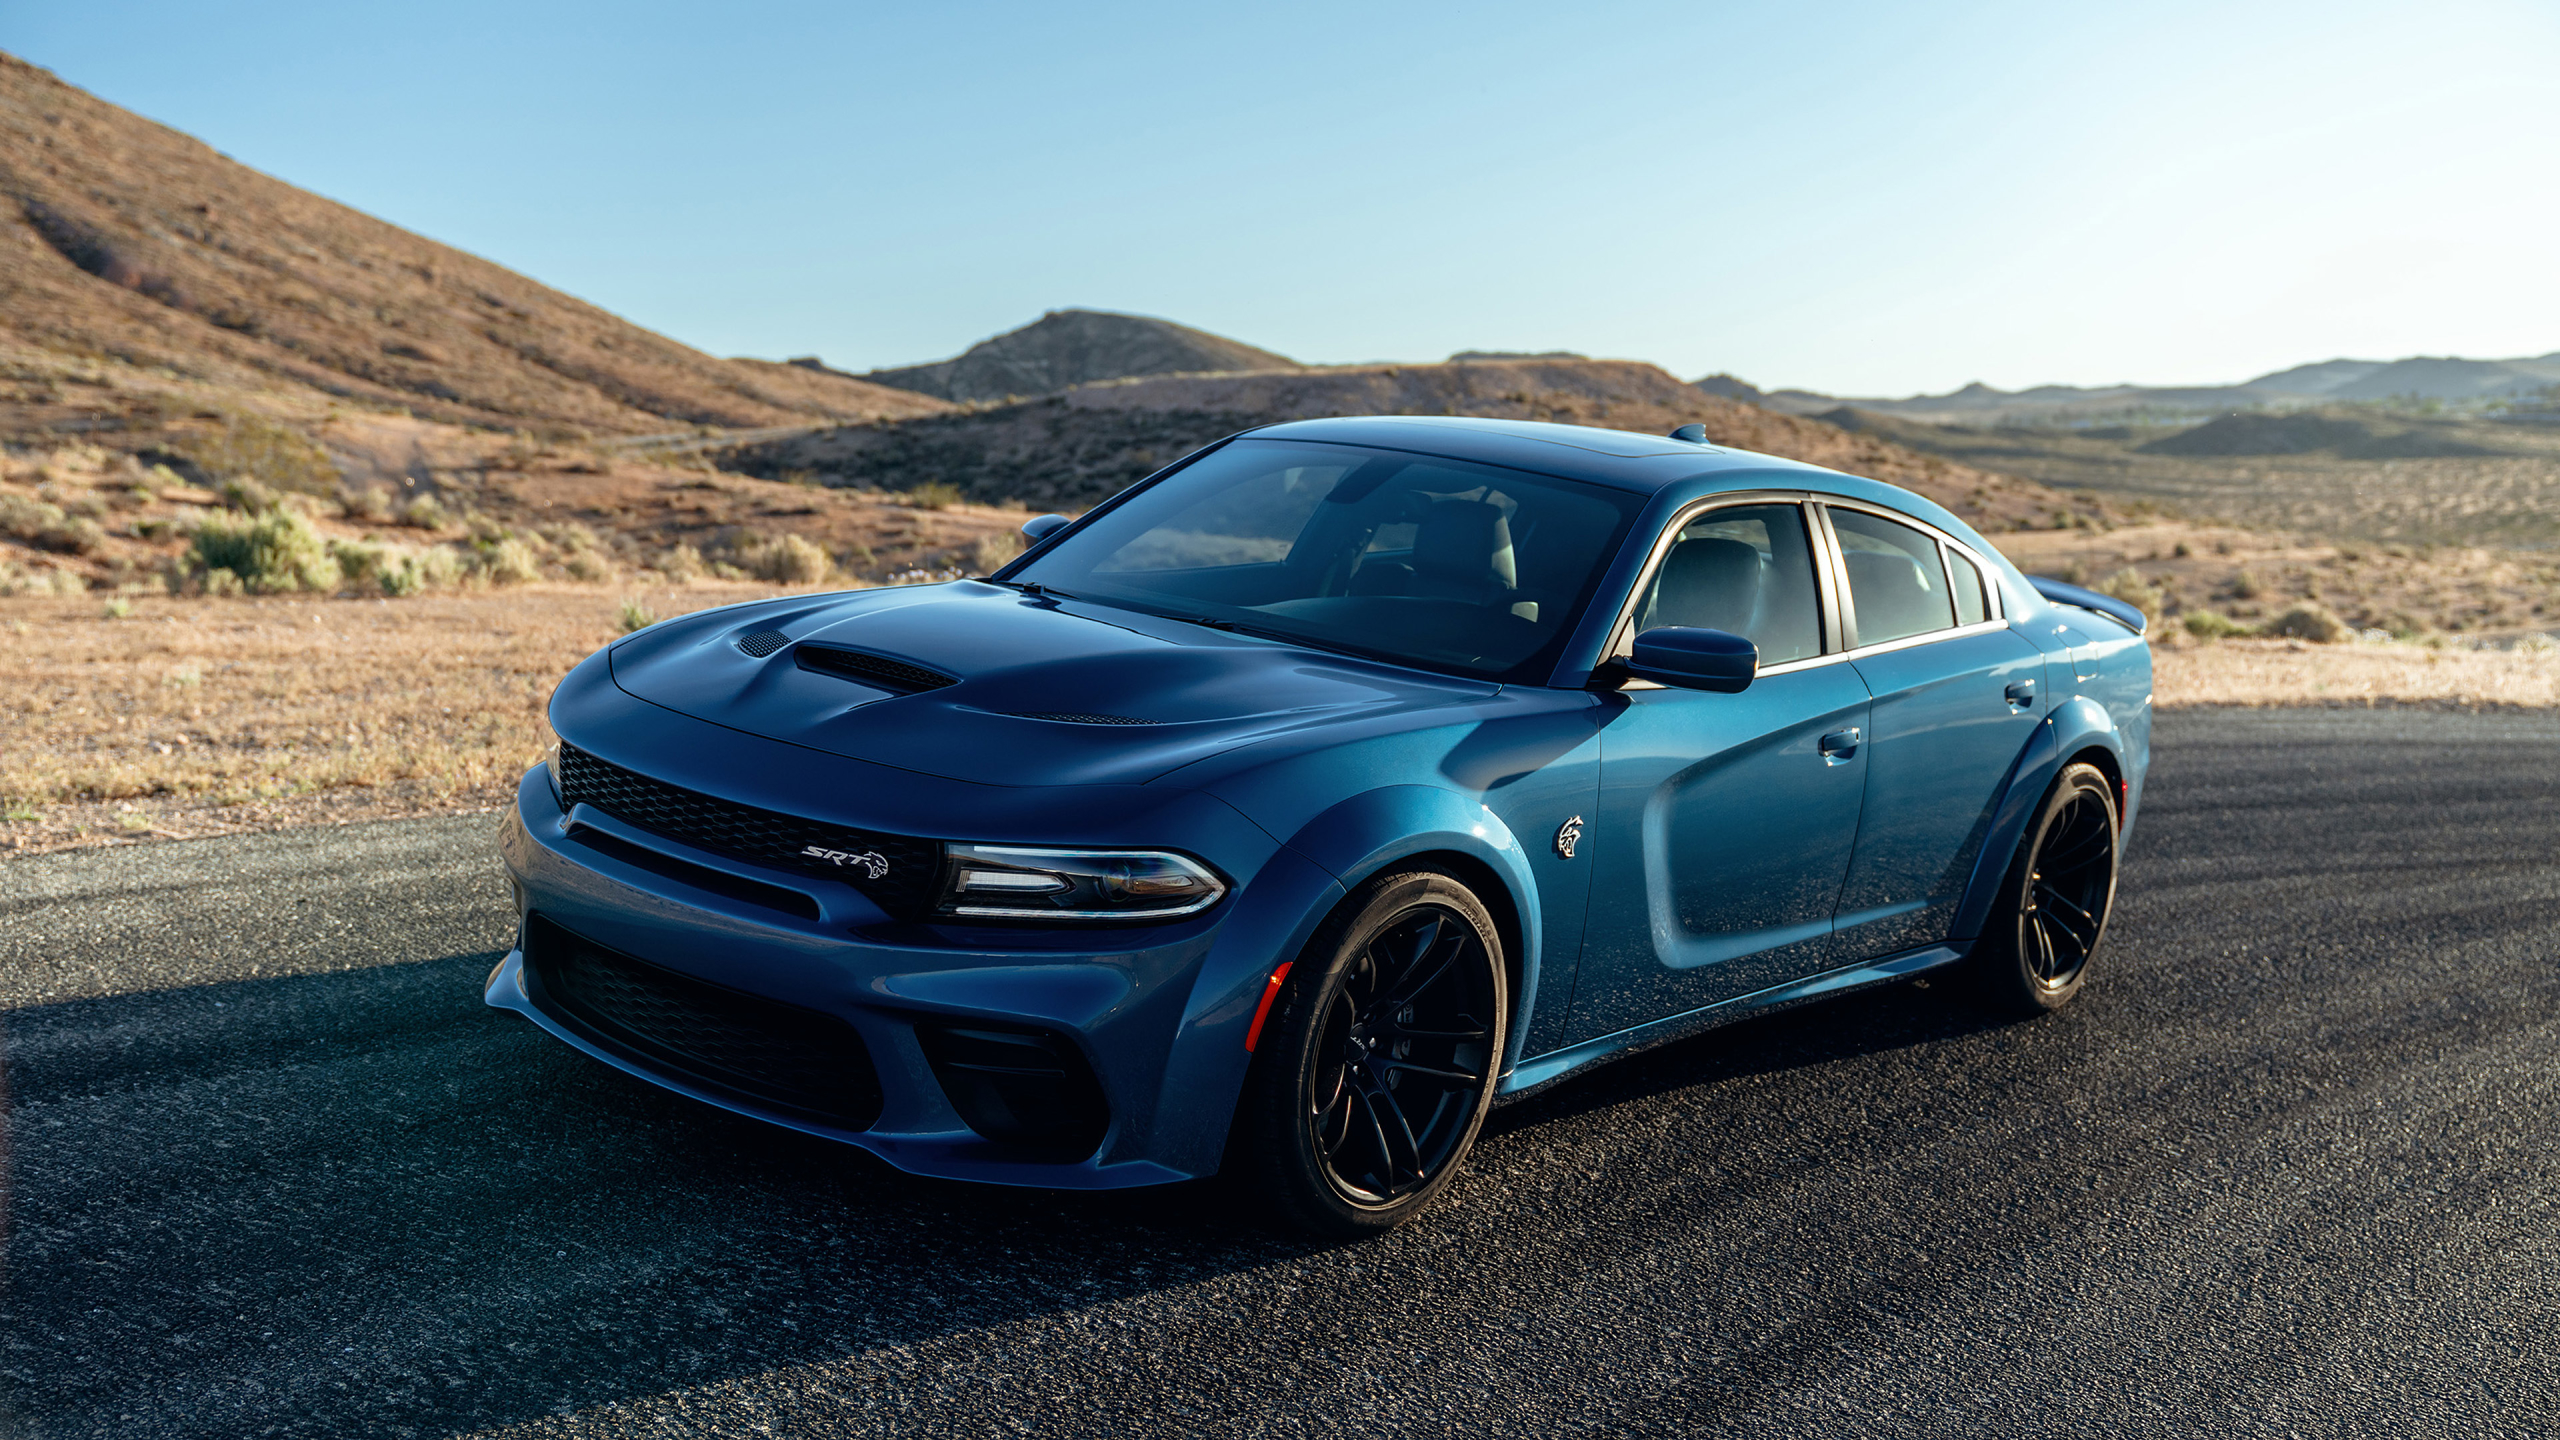 General 2560x1440 hellcat blue cars car vehicle Dodge Dodge Charger muscle cars American cars